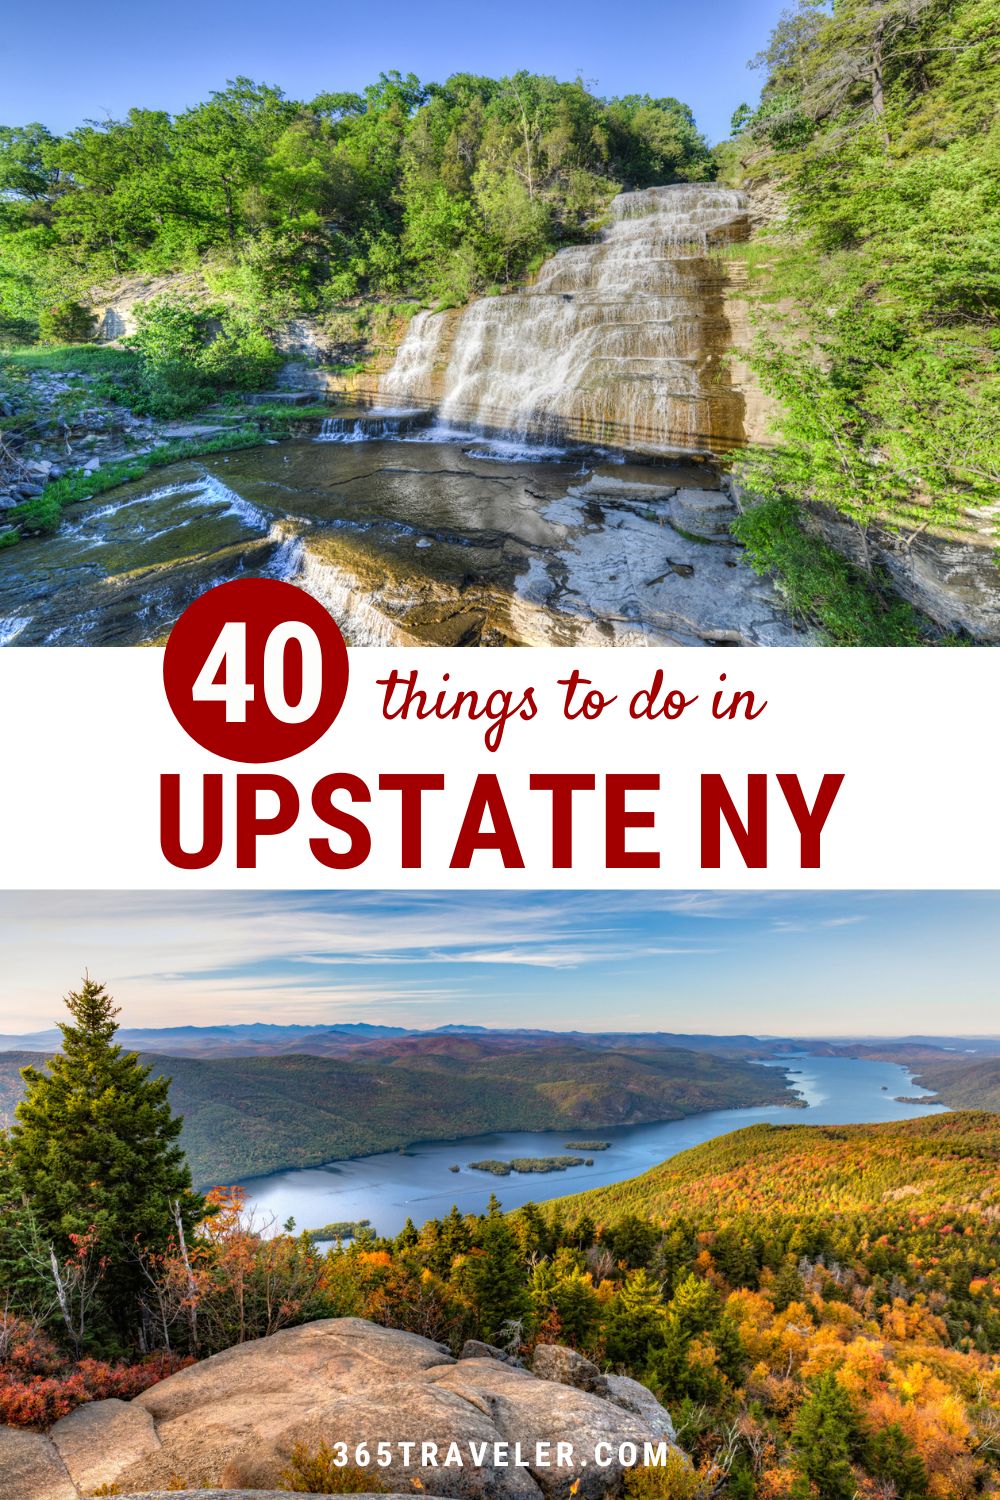 40 BEST THINGS TO DO IN UPSTATE NY YOU CAN'T MISS